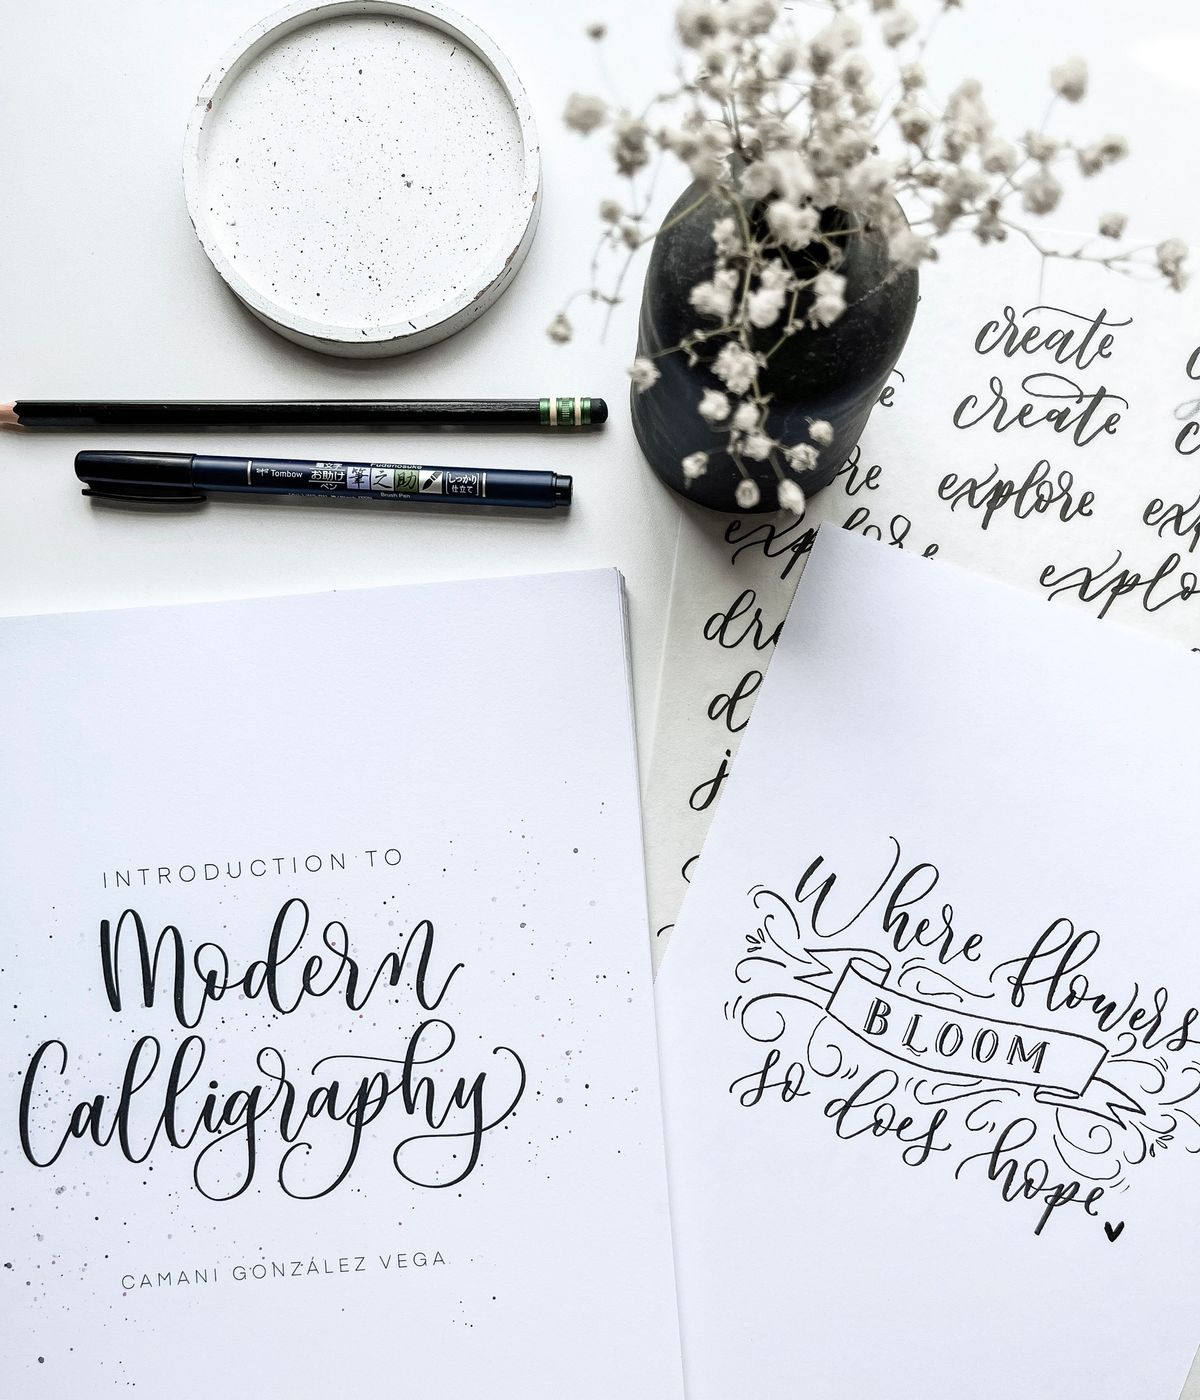 INTRODUCTION TO MODERN CALLIGRAPHY WITH BRUSH PEN